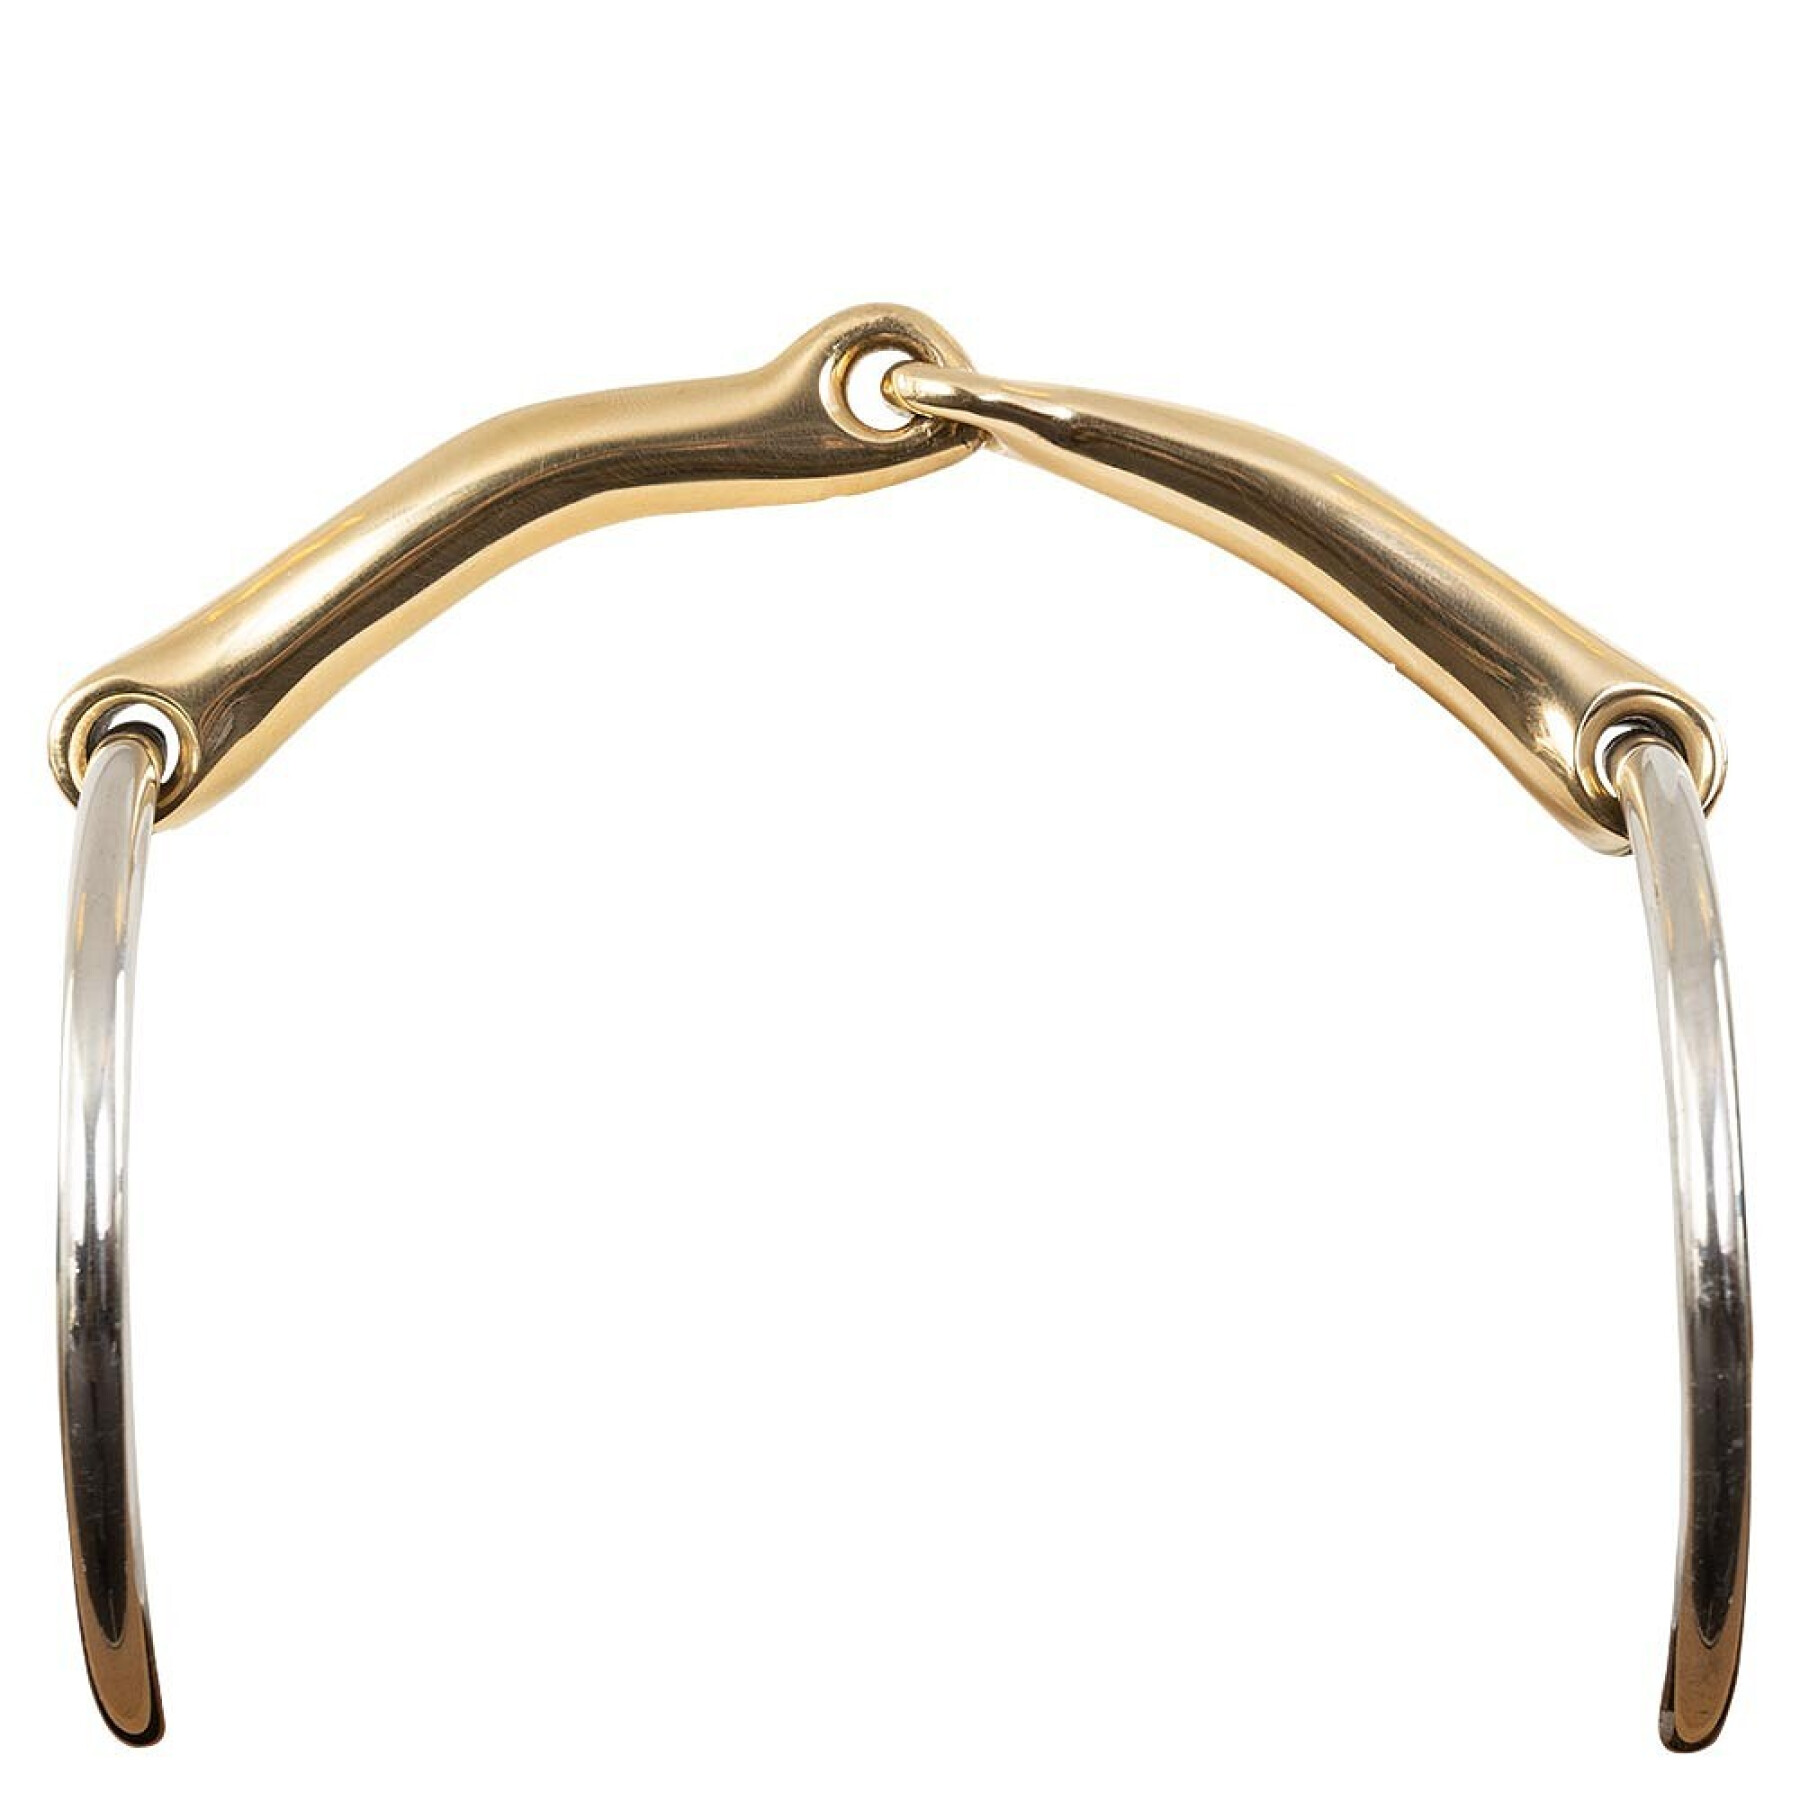 Single bit for curved horses BR Equitation Soft Contact